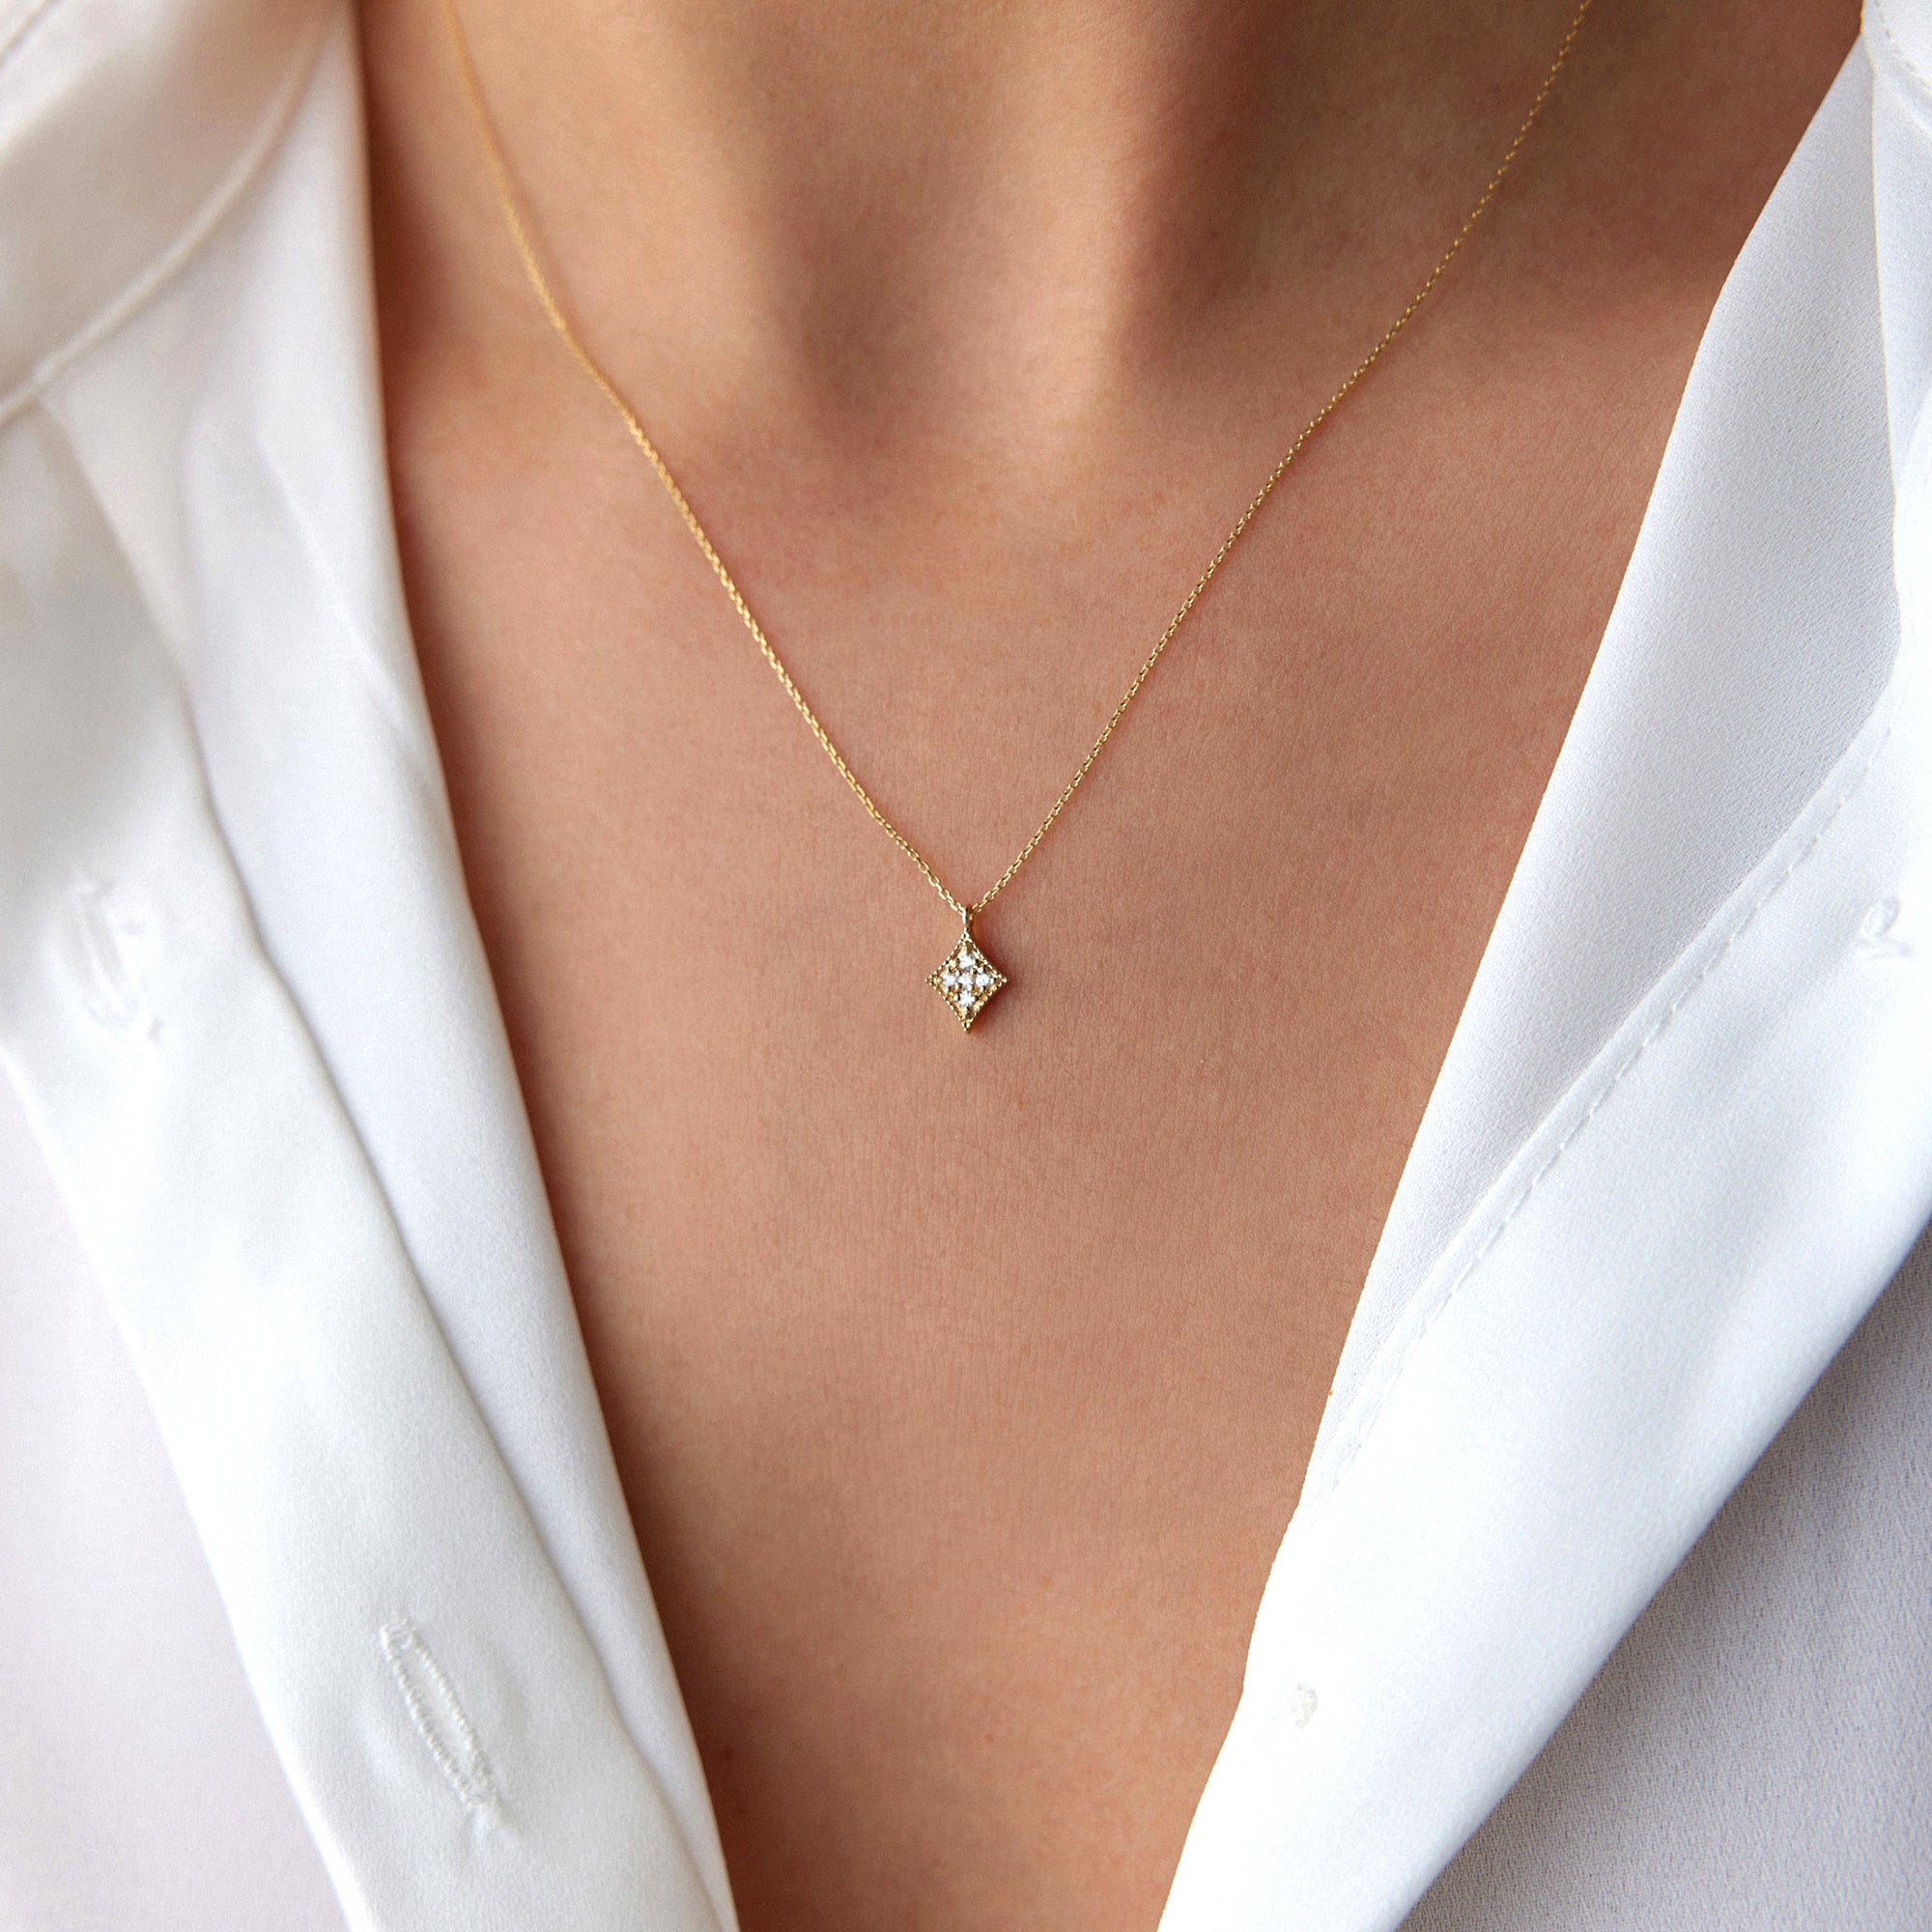 Tiny Diamond Necklace Available in 14K and 18K Gold